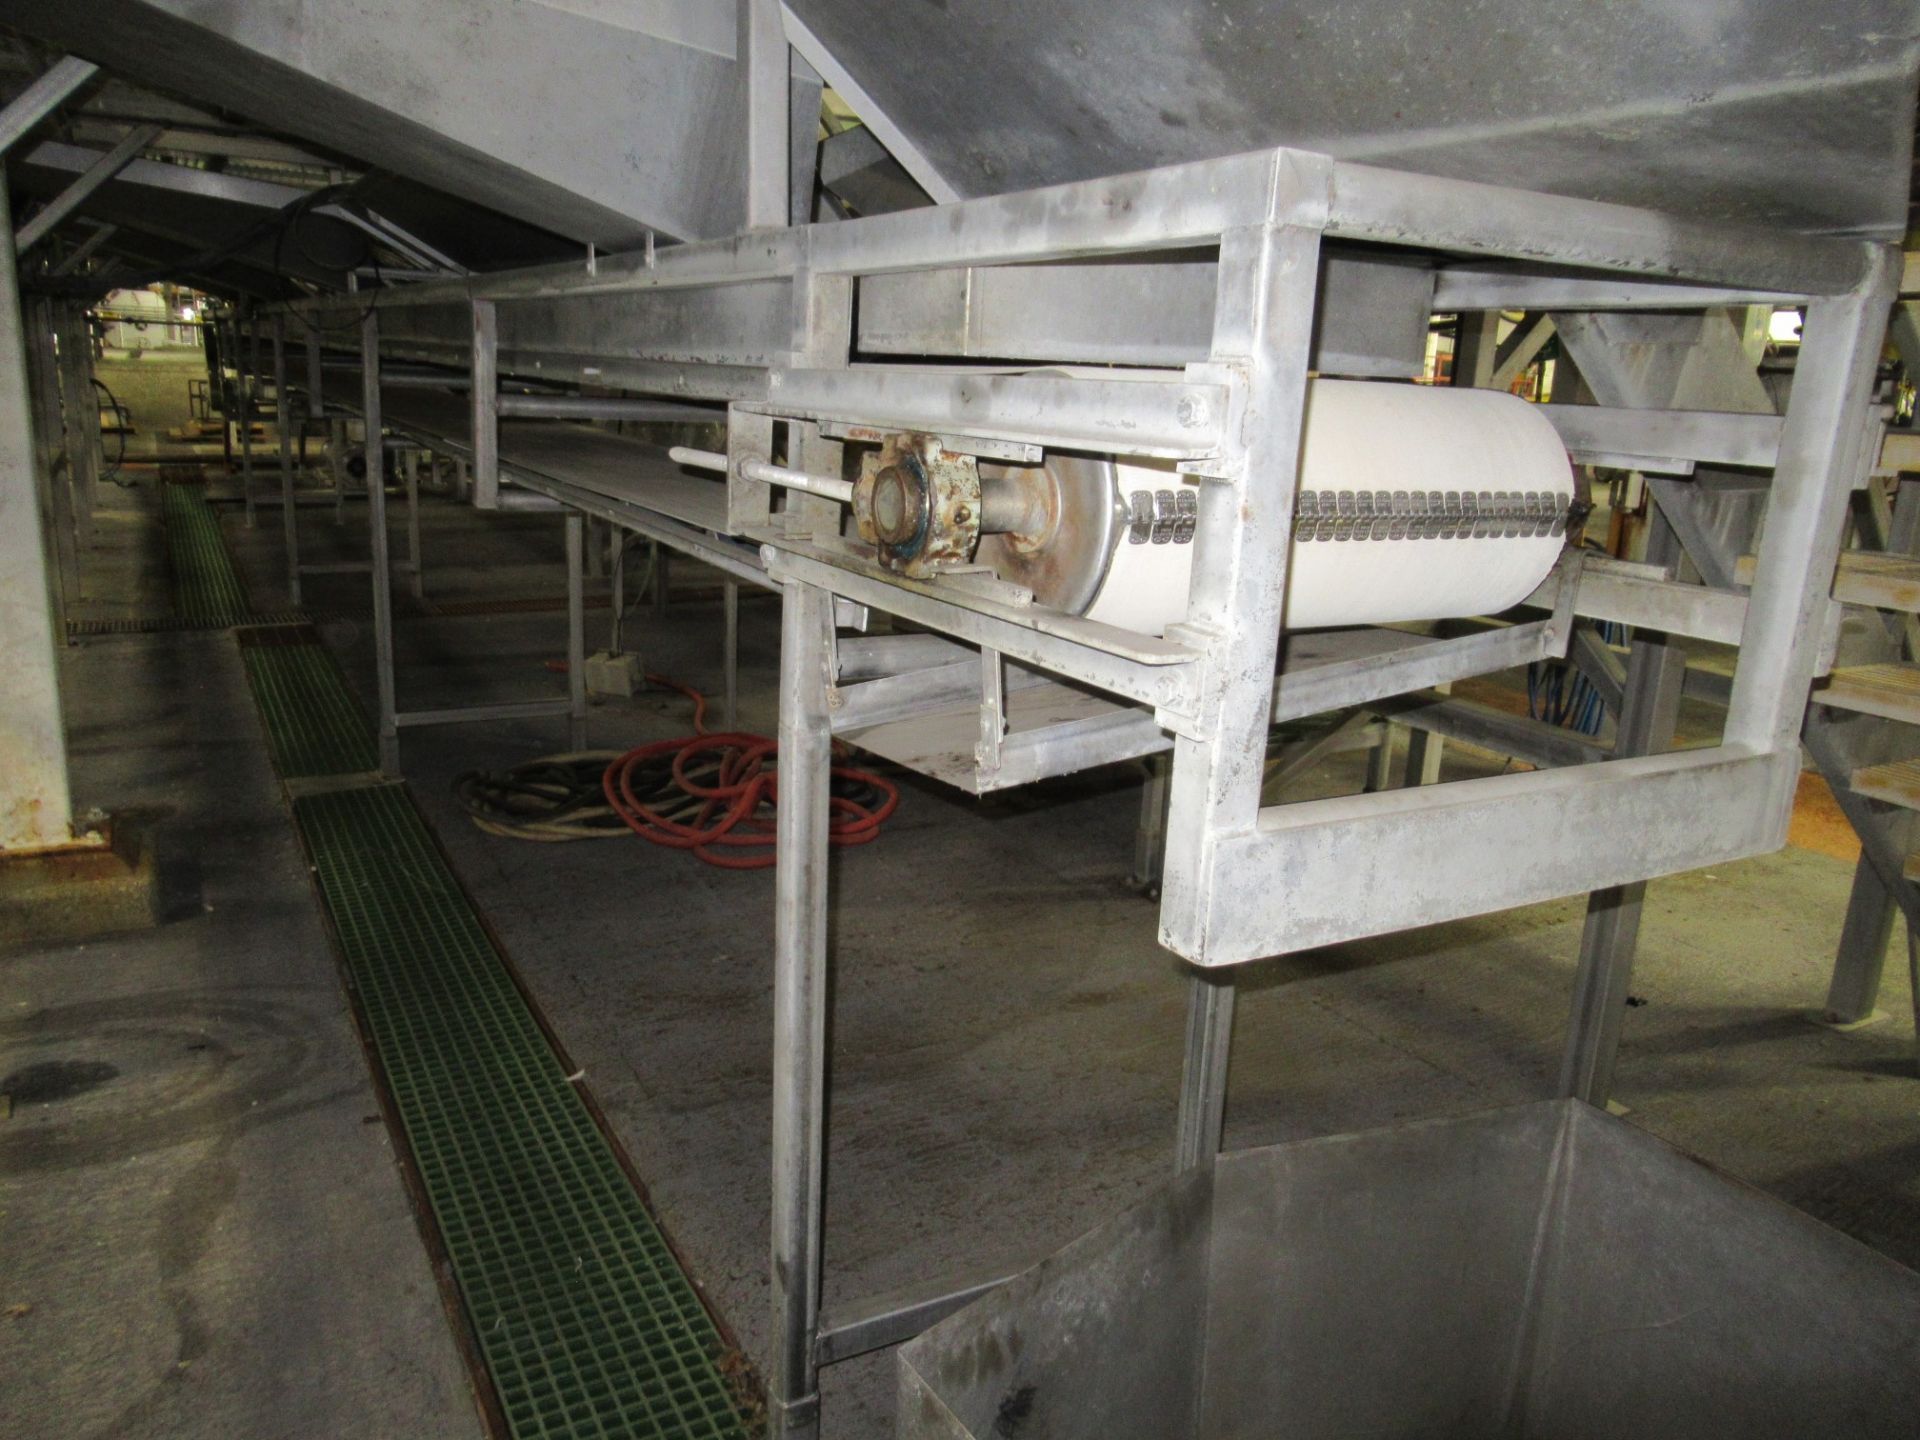 Pre Dicer Inspection Structure - Image 6 of 8